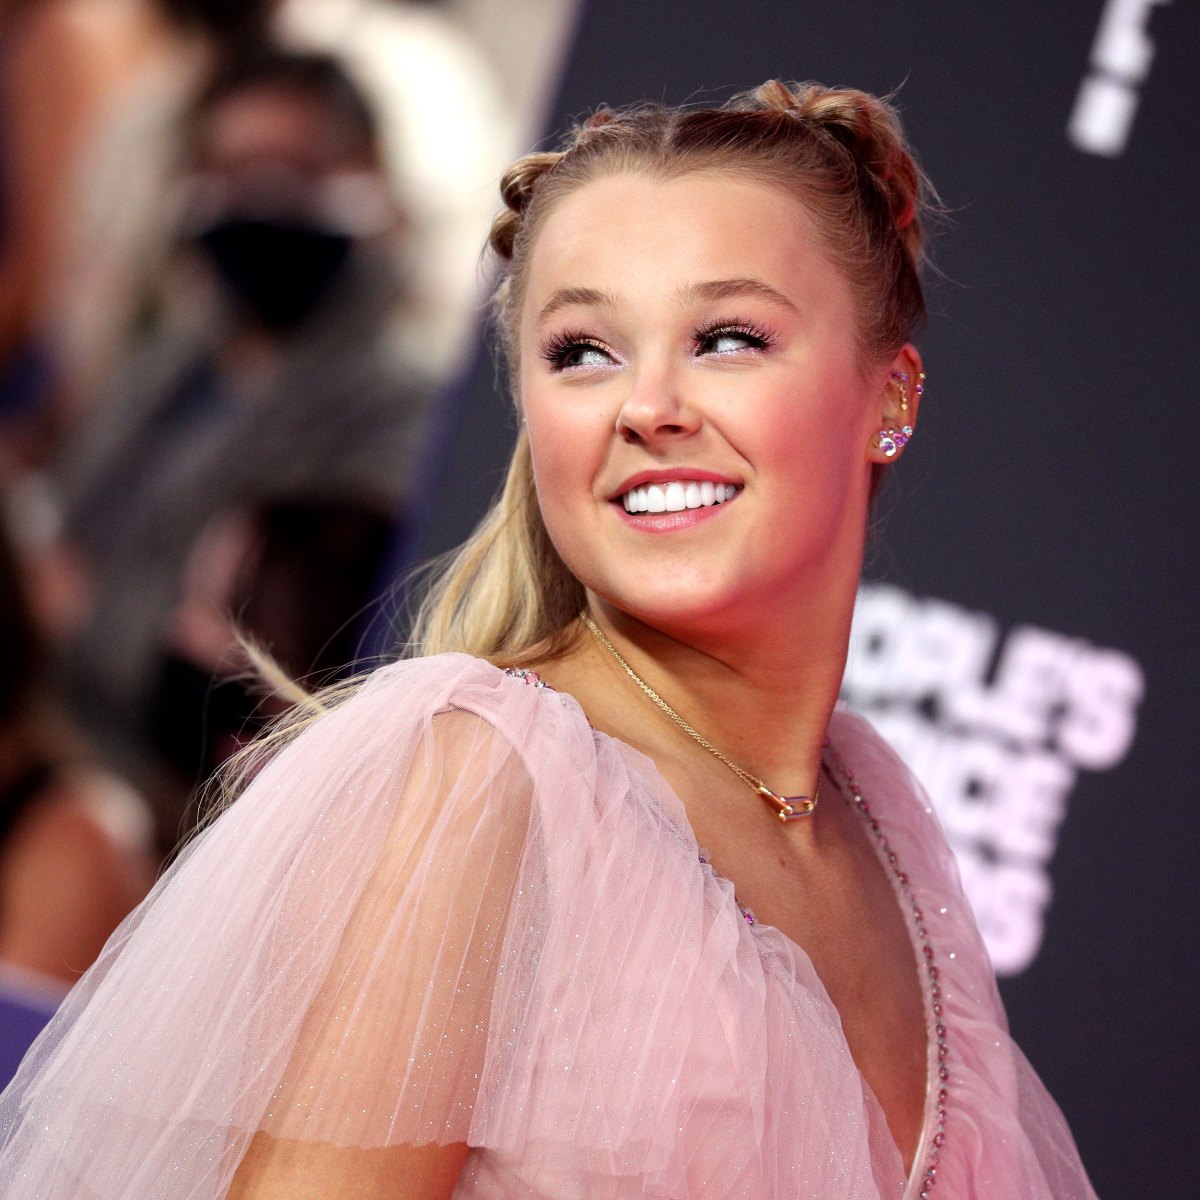 JoJo Siwa is so happy but 'not ready' to label her sexuality - Los